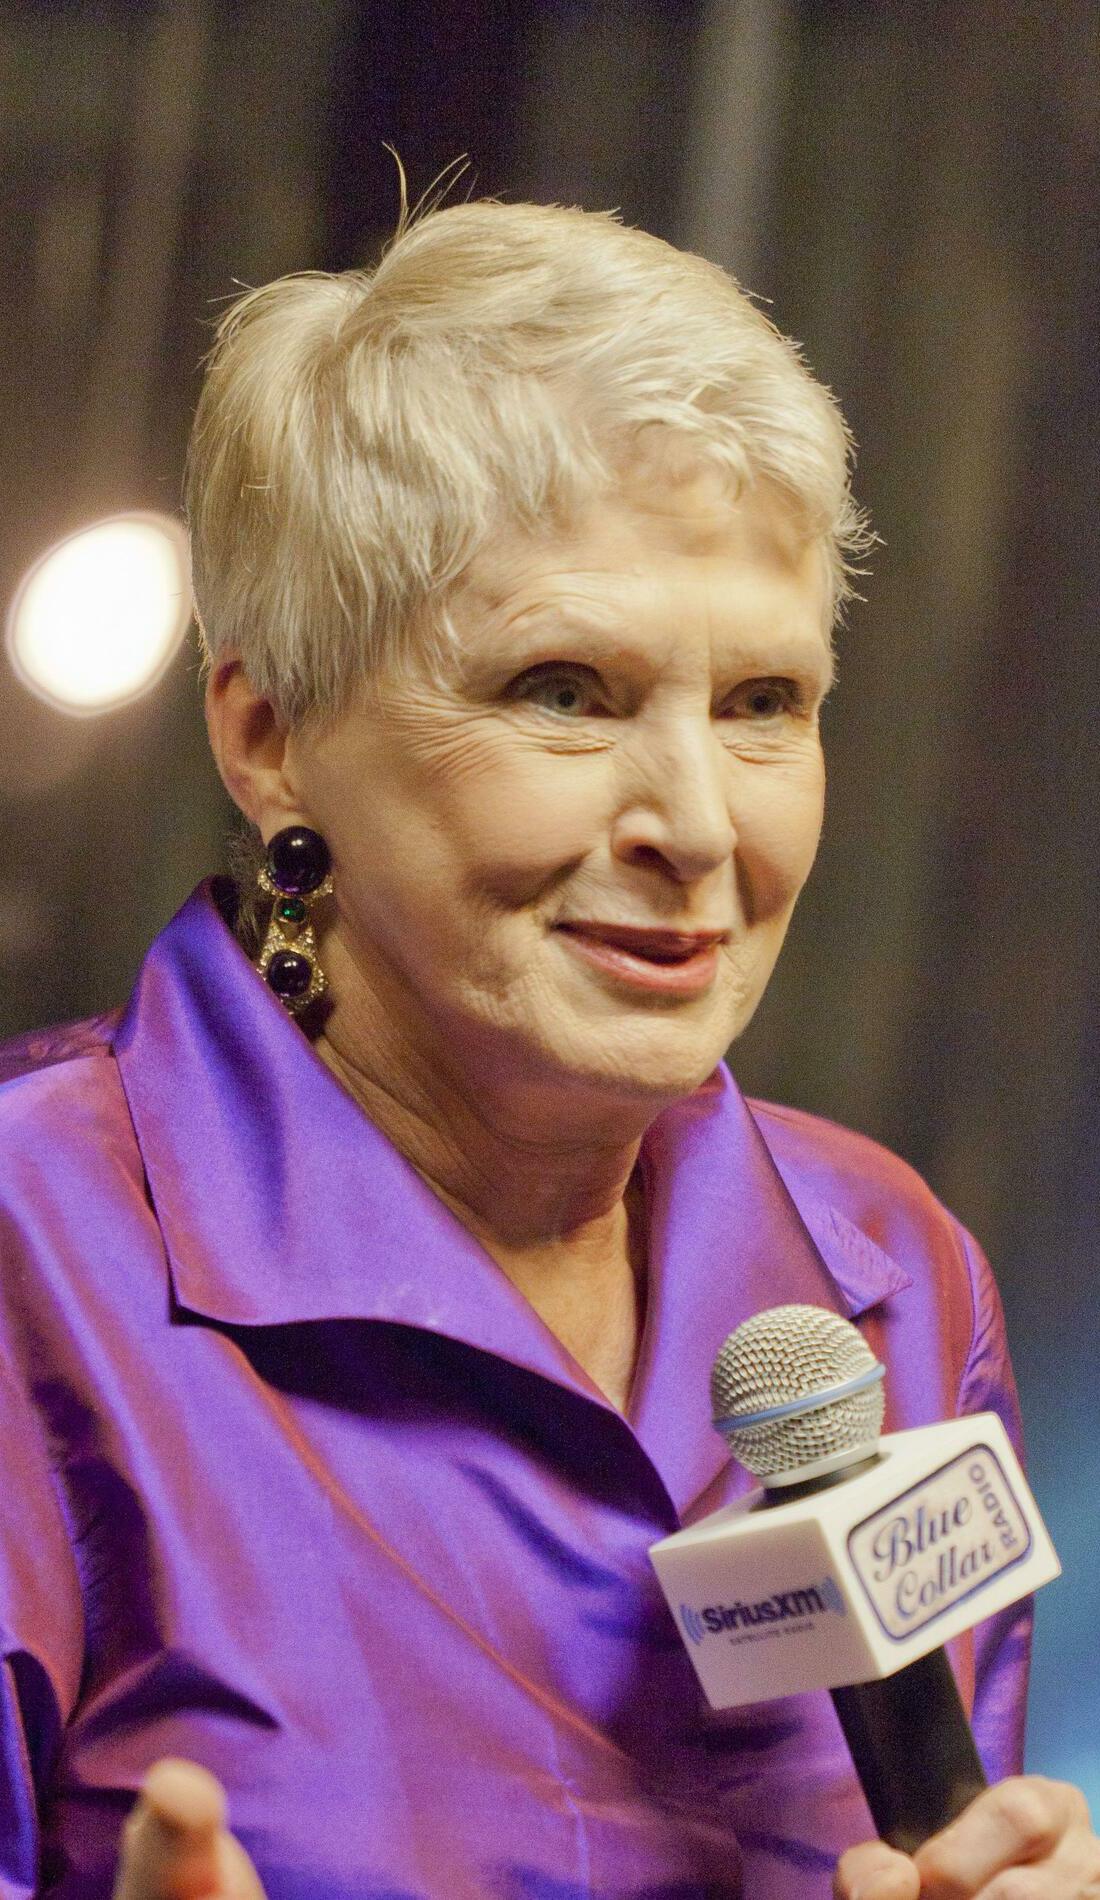 A Jeanne Robertson live event